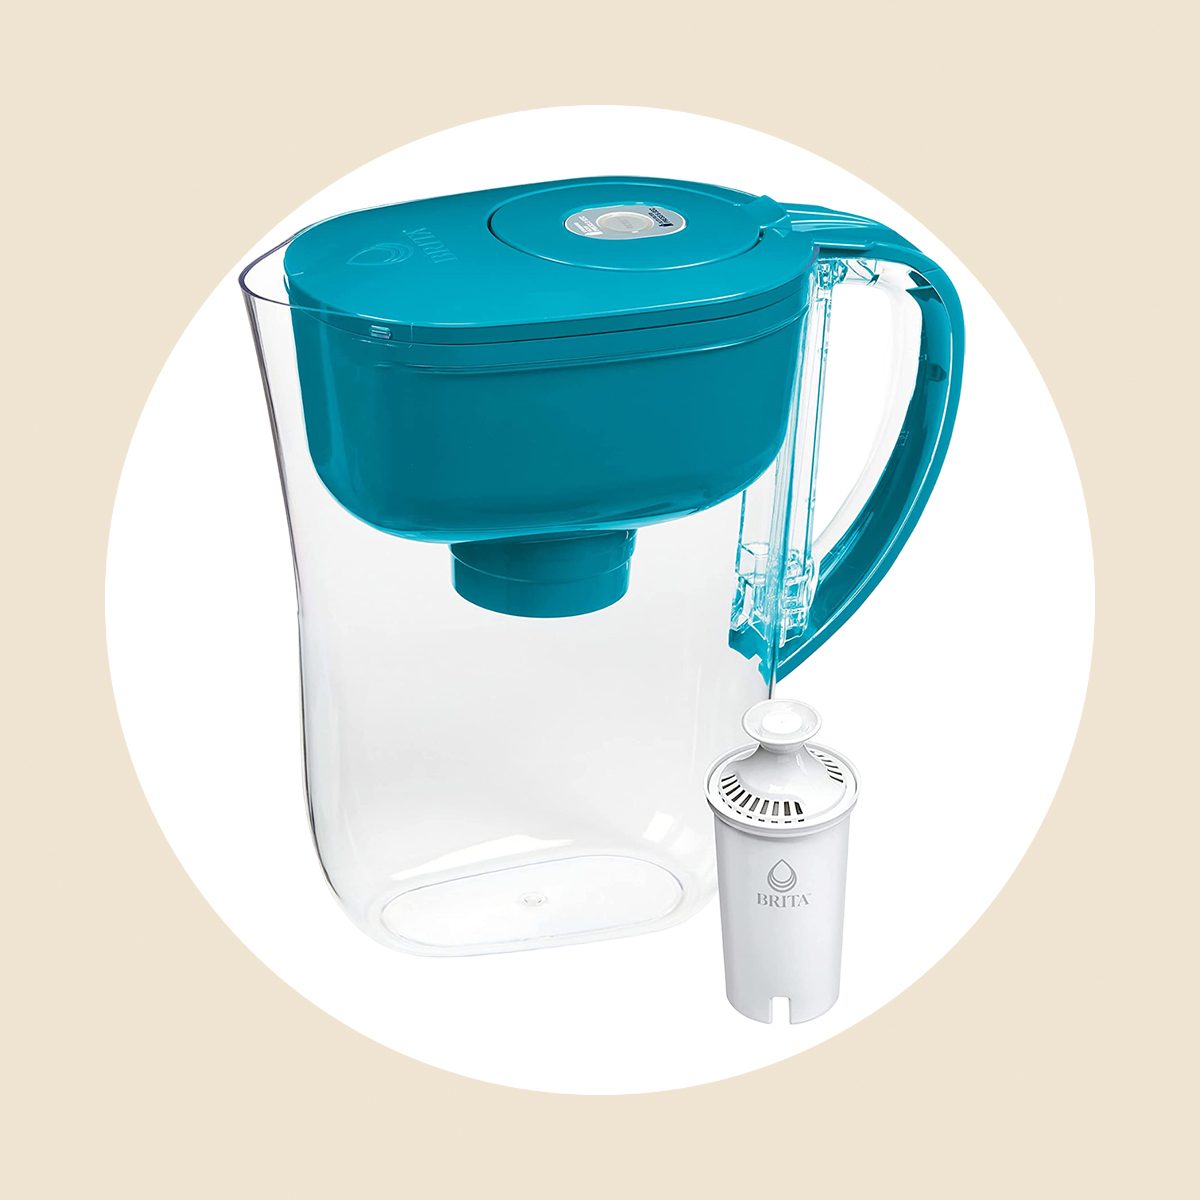 3 Best Water Filter Pitchers and Dispensers in 2022